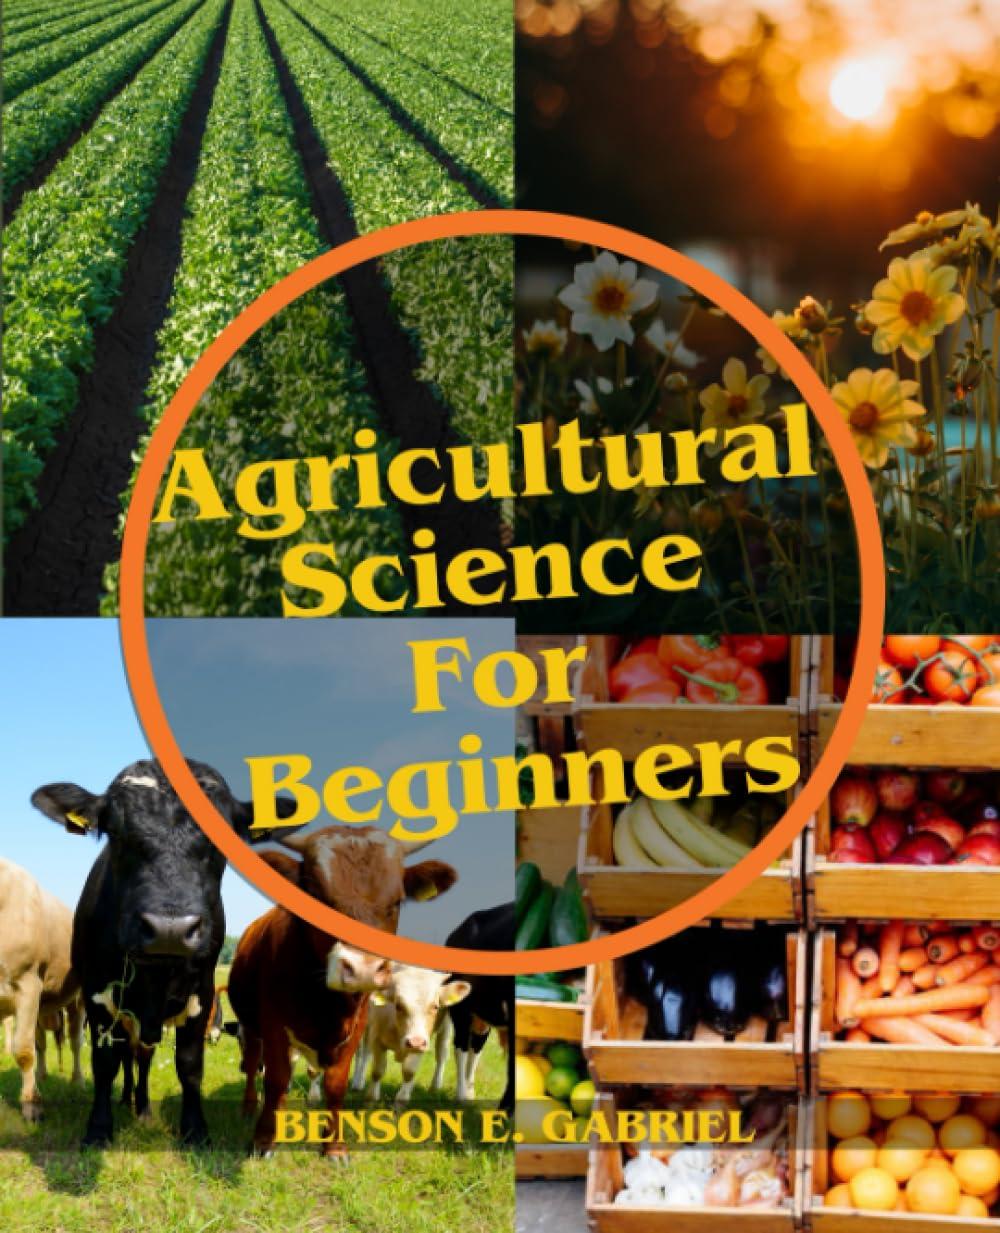 agricultural science for beginners 1st edition benson e. gabriel b0cgc6y2pz, 979-8857297643